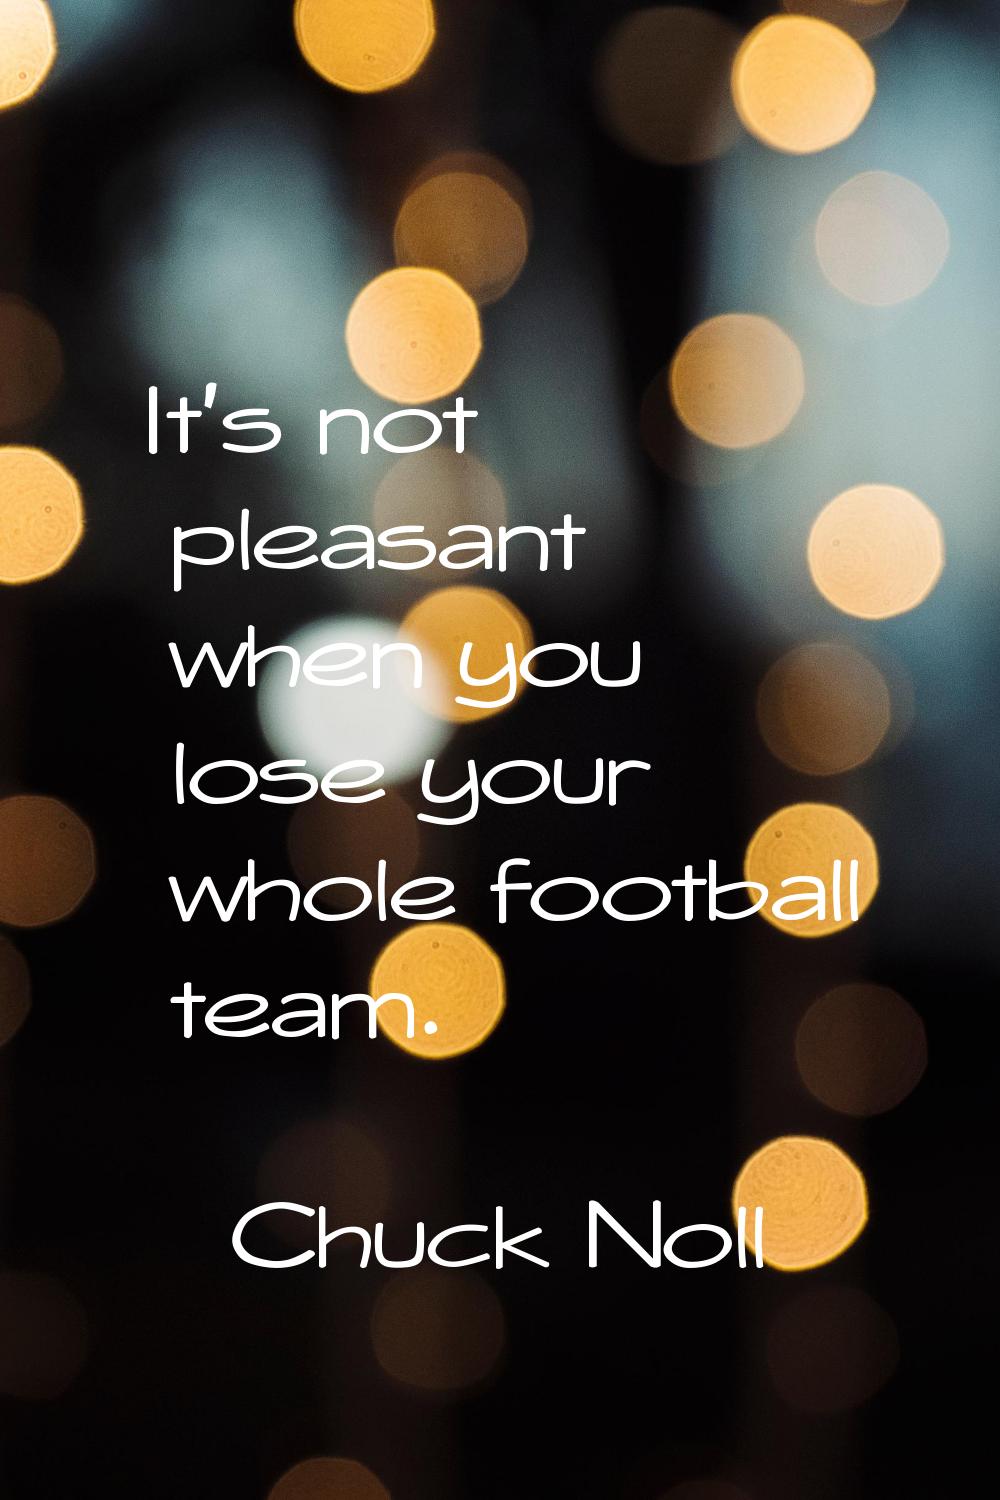 It's not pleasant when you lose your whole football team.